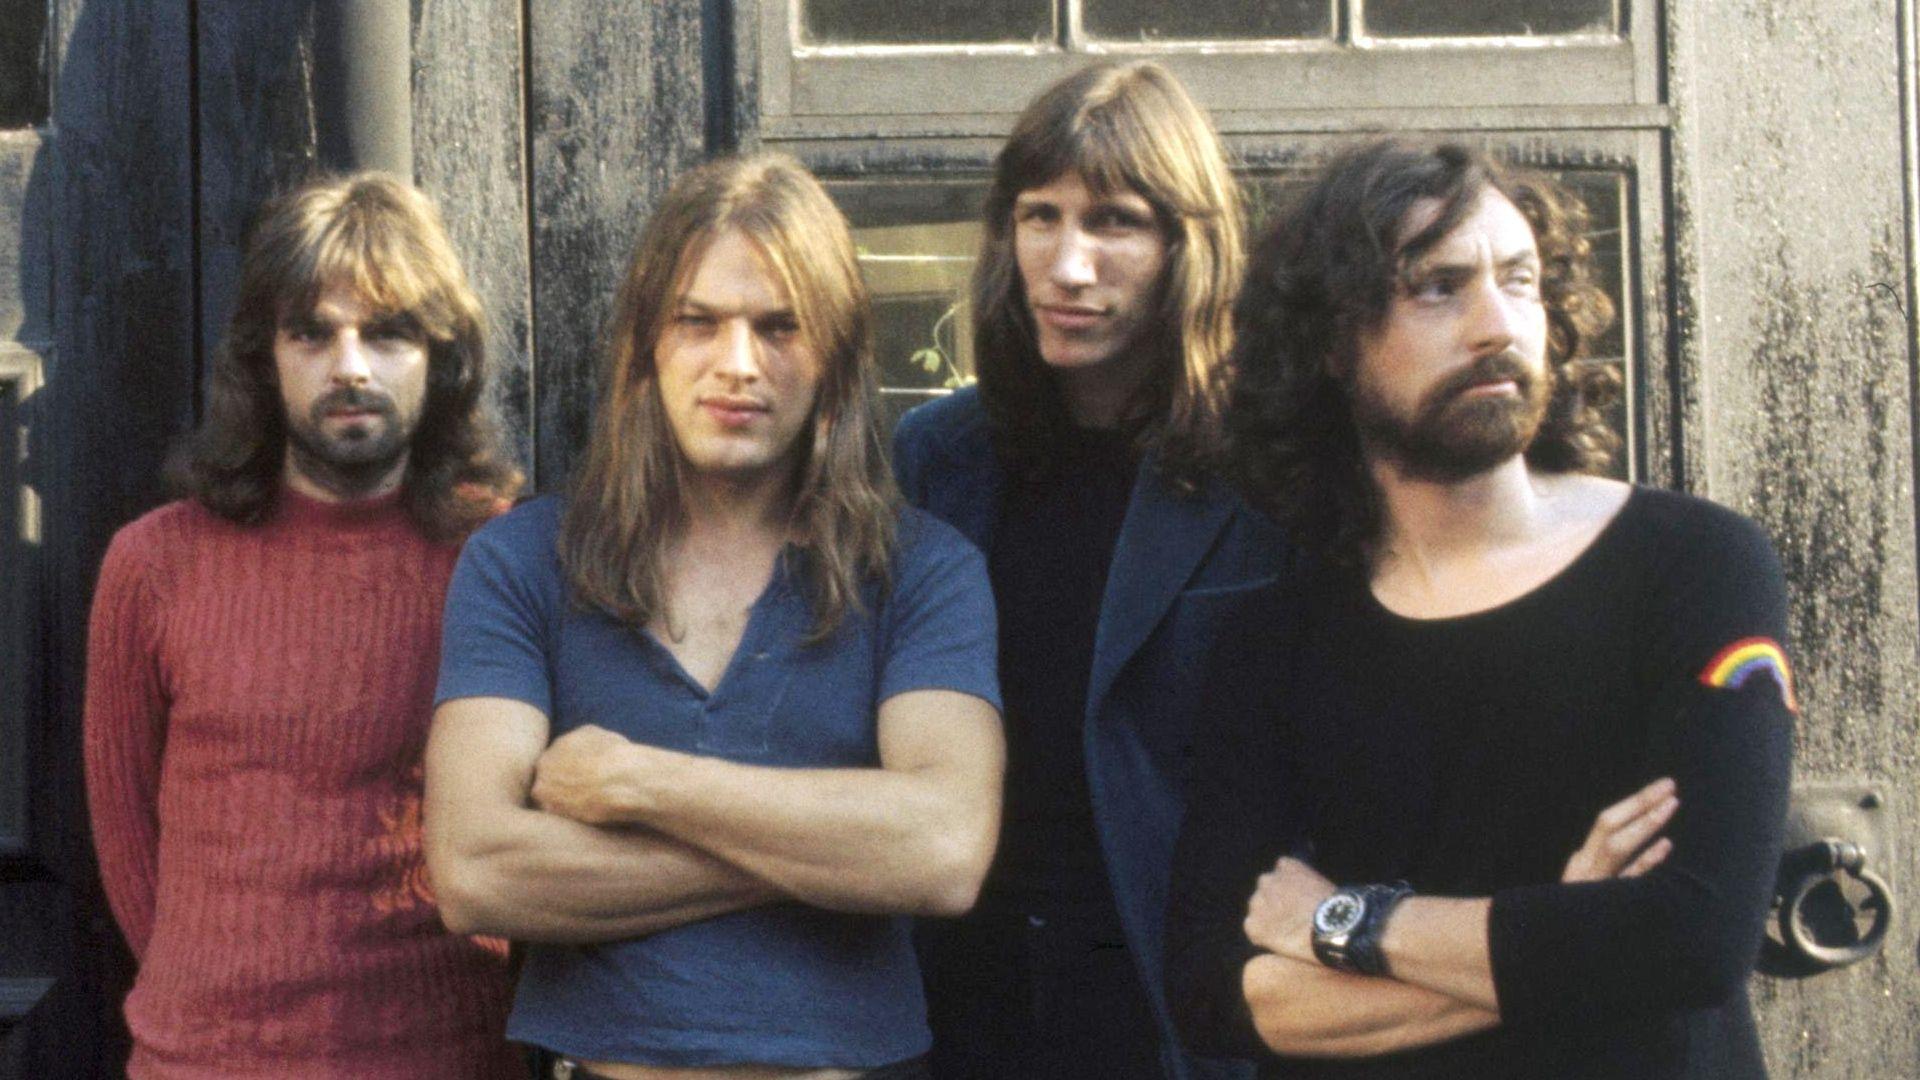 Download wallpapers 1920x1080 pink floyd, band, members, youth, hair